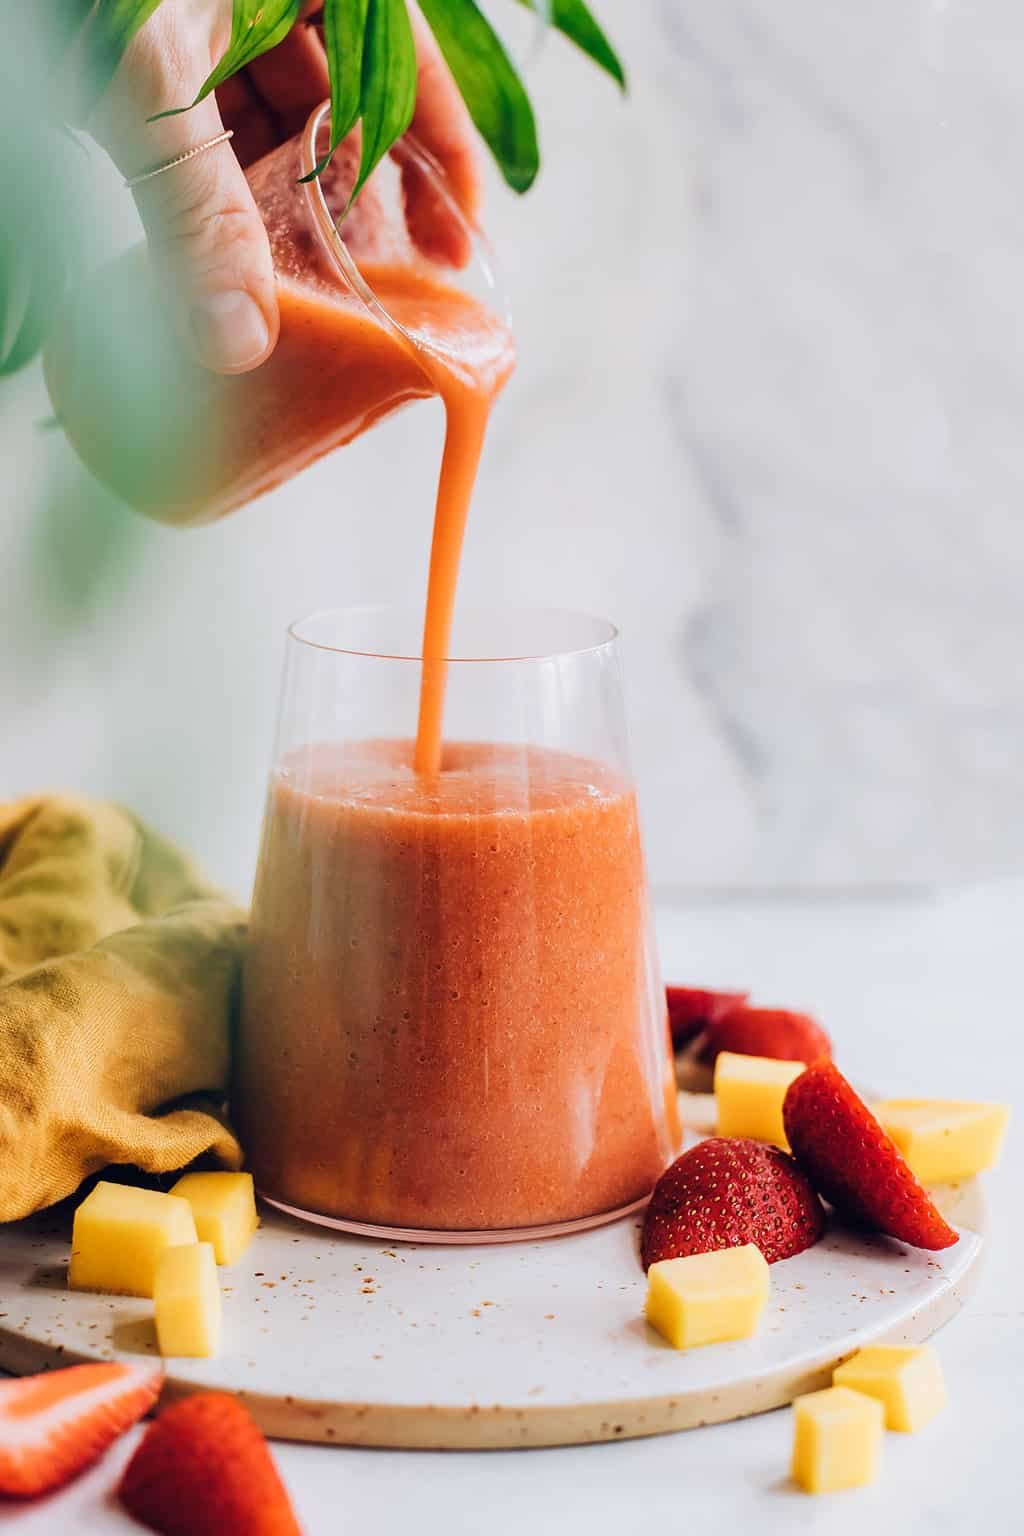 Rev Up Your Metabolism with 2 Fat-Burning Strawberry Mango Smoothies